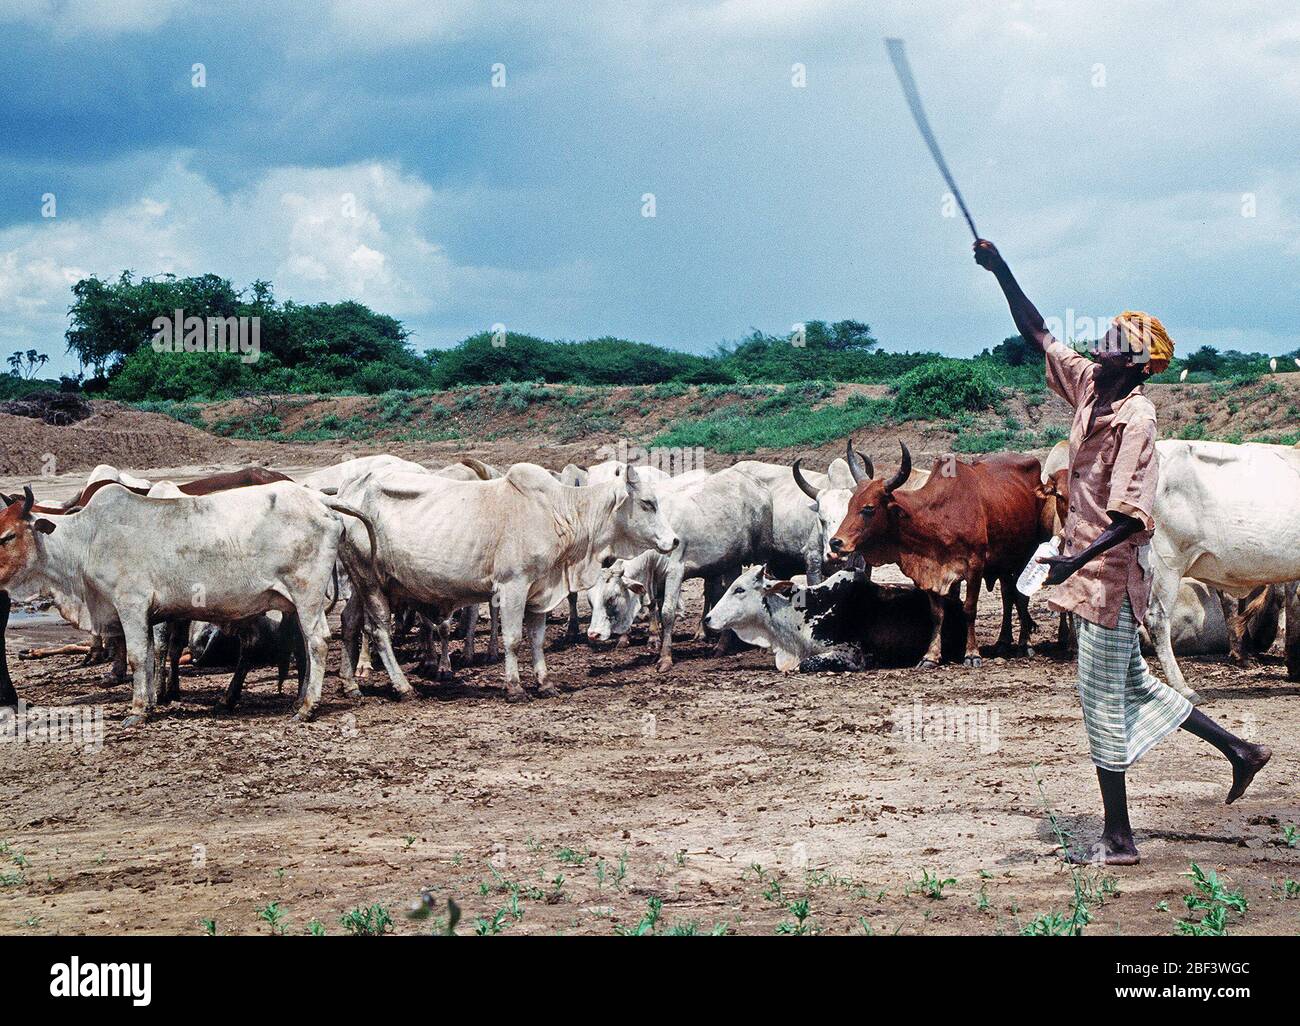 1993 - A Somali rancher herds cattle in Kismayo, Somalia while U.S. Forces were in Somalia for Operation Continue Hope. Stock Photo